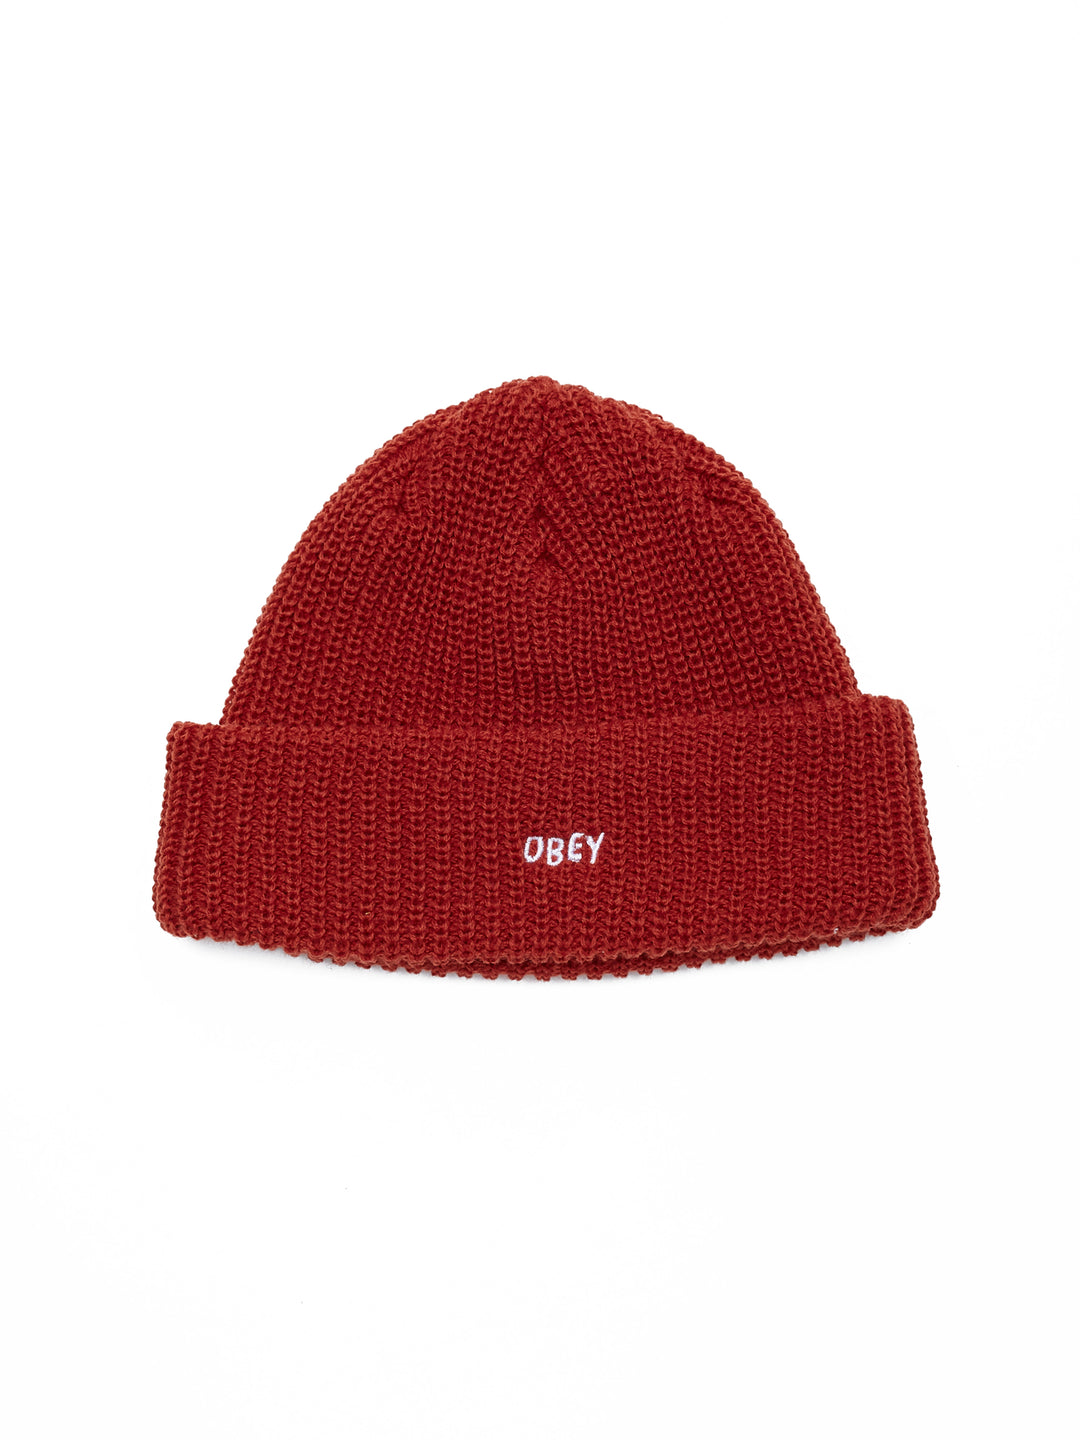 Jumbled Beanie / Brick Red - West of Camden - Main Image Number 1 of 2